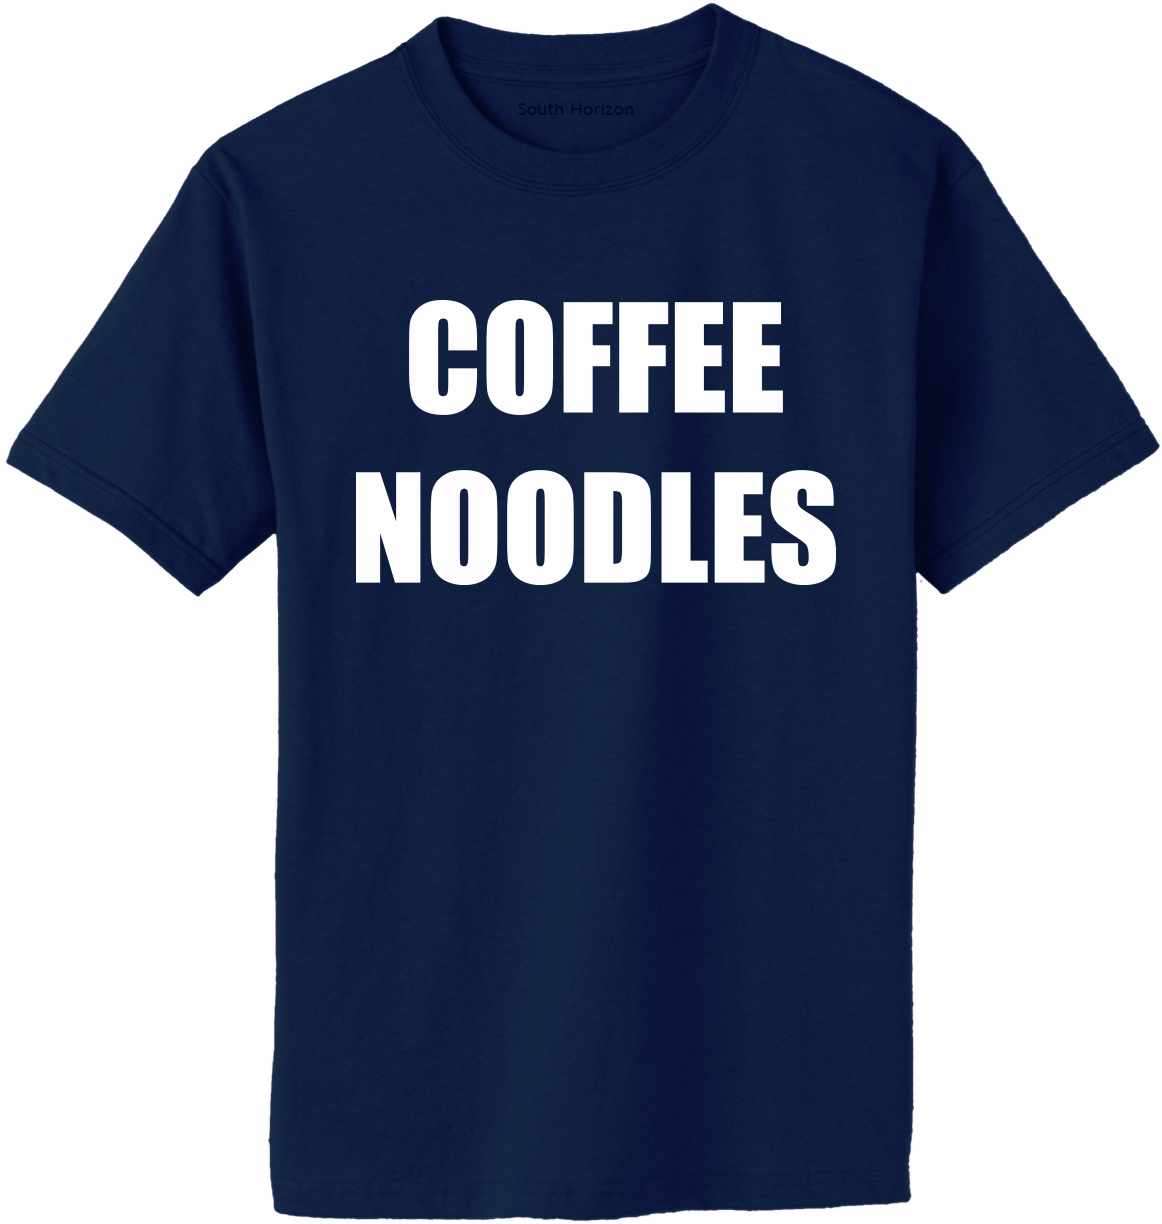 COFFEE NOODLES on Adult T-Shirt (#749-1)